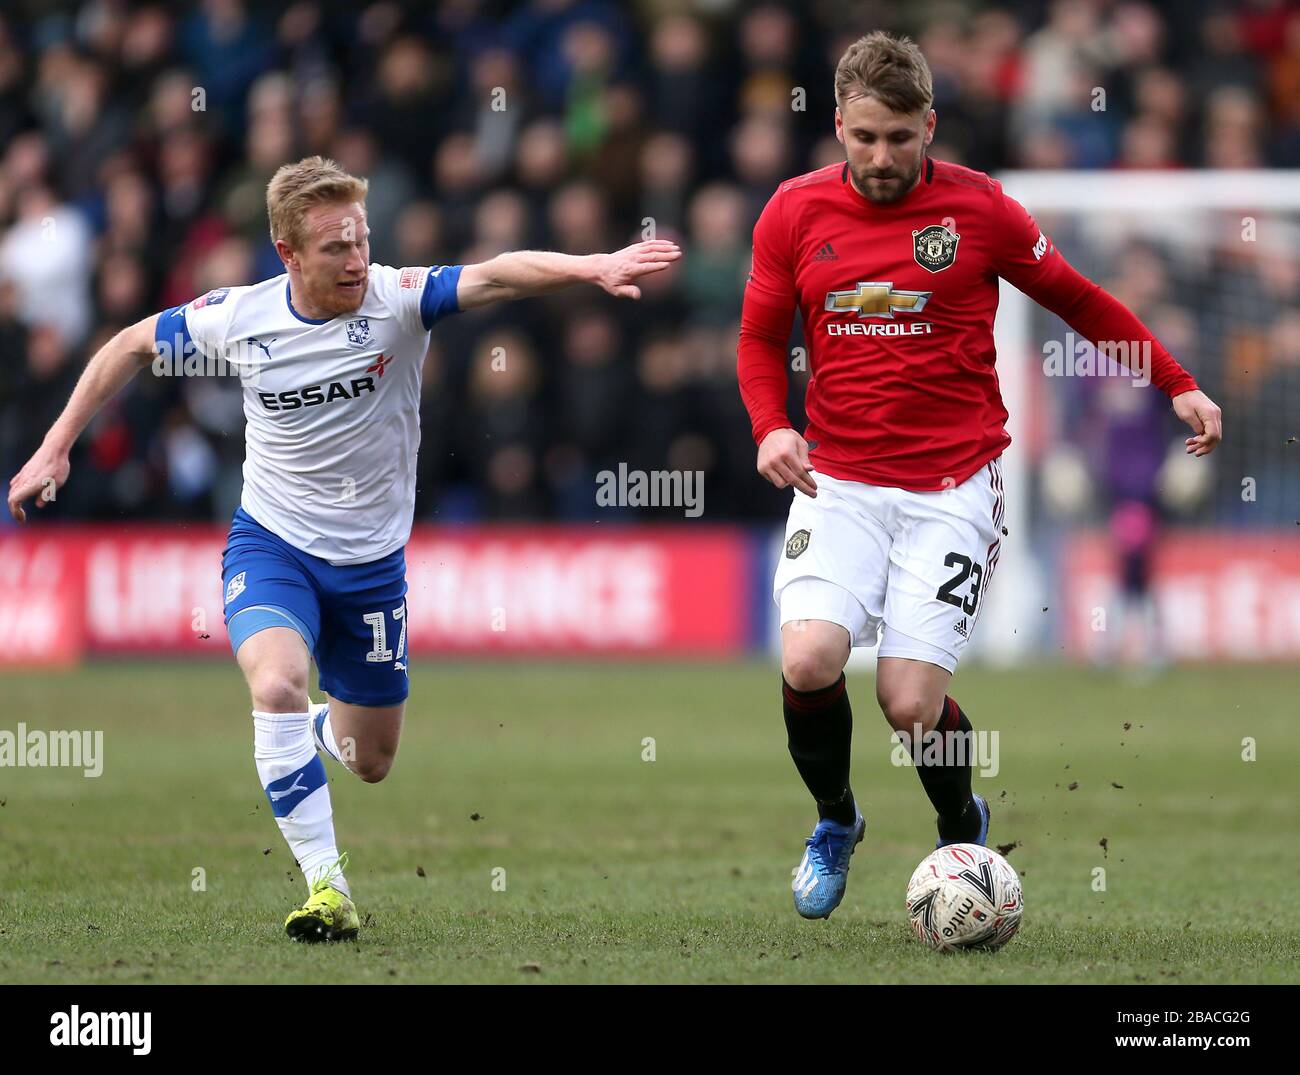 Tranmere Rovers' David Perkins (left) and Manchester United's Luke Shaw battle for the ball Stock Photo